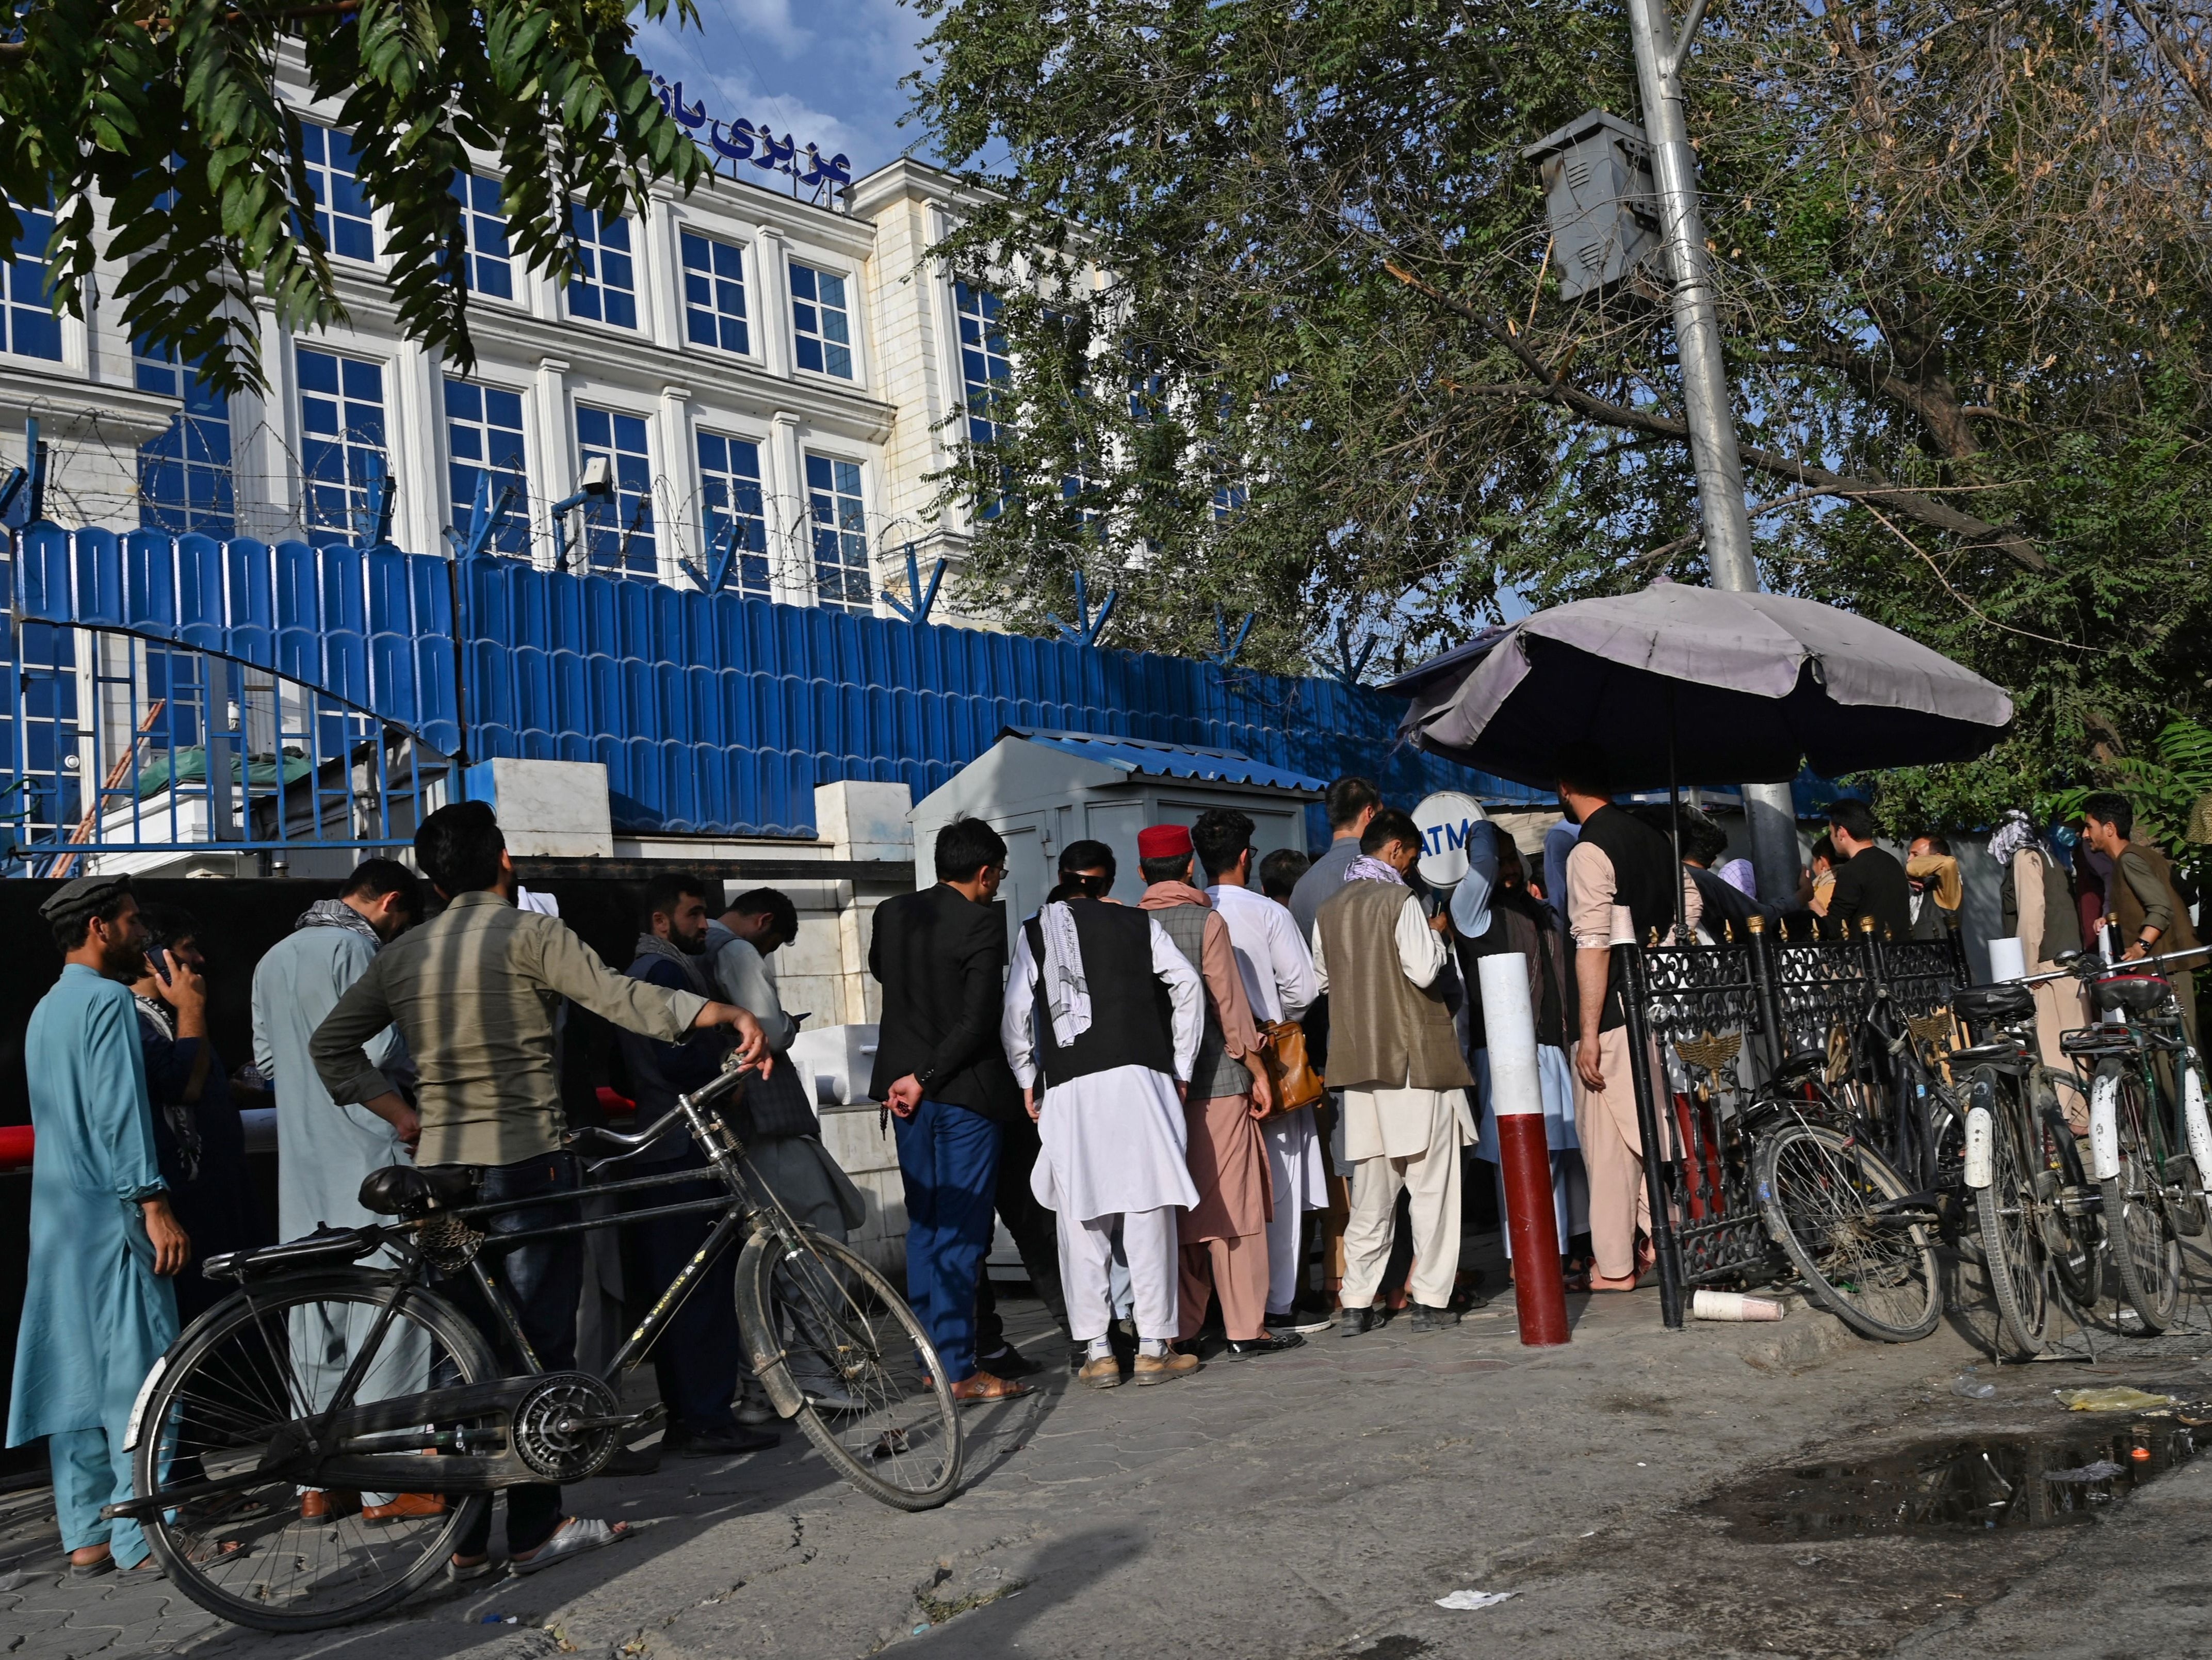 Afghans queue to collect money from an ATM in front of a bank in Kabul after the Taliban takeover